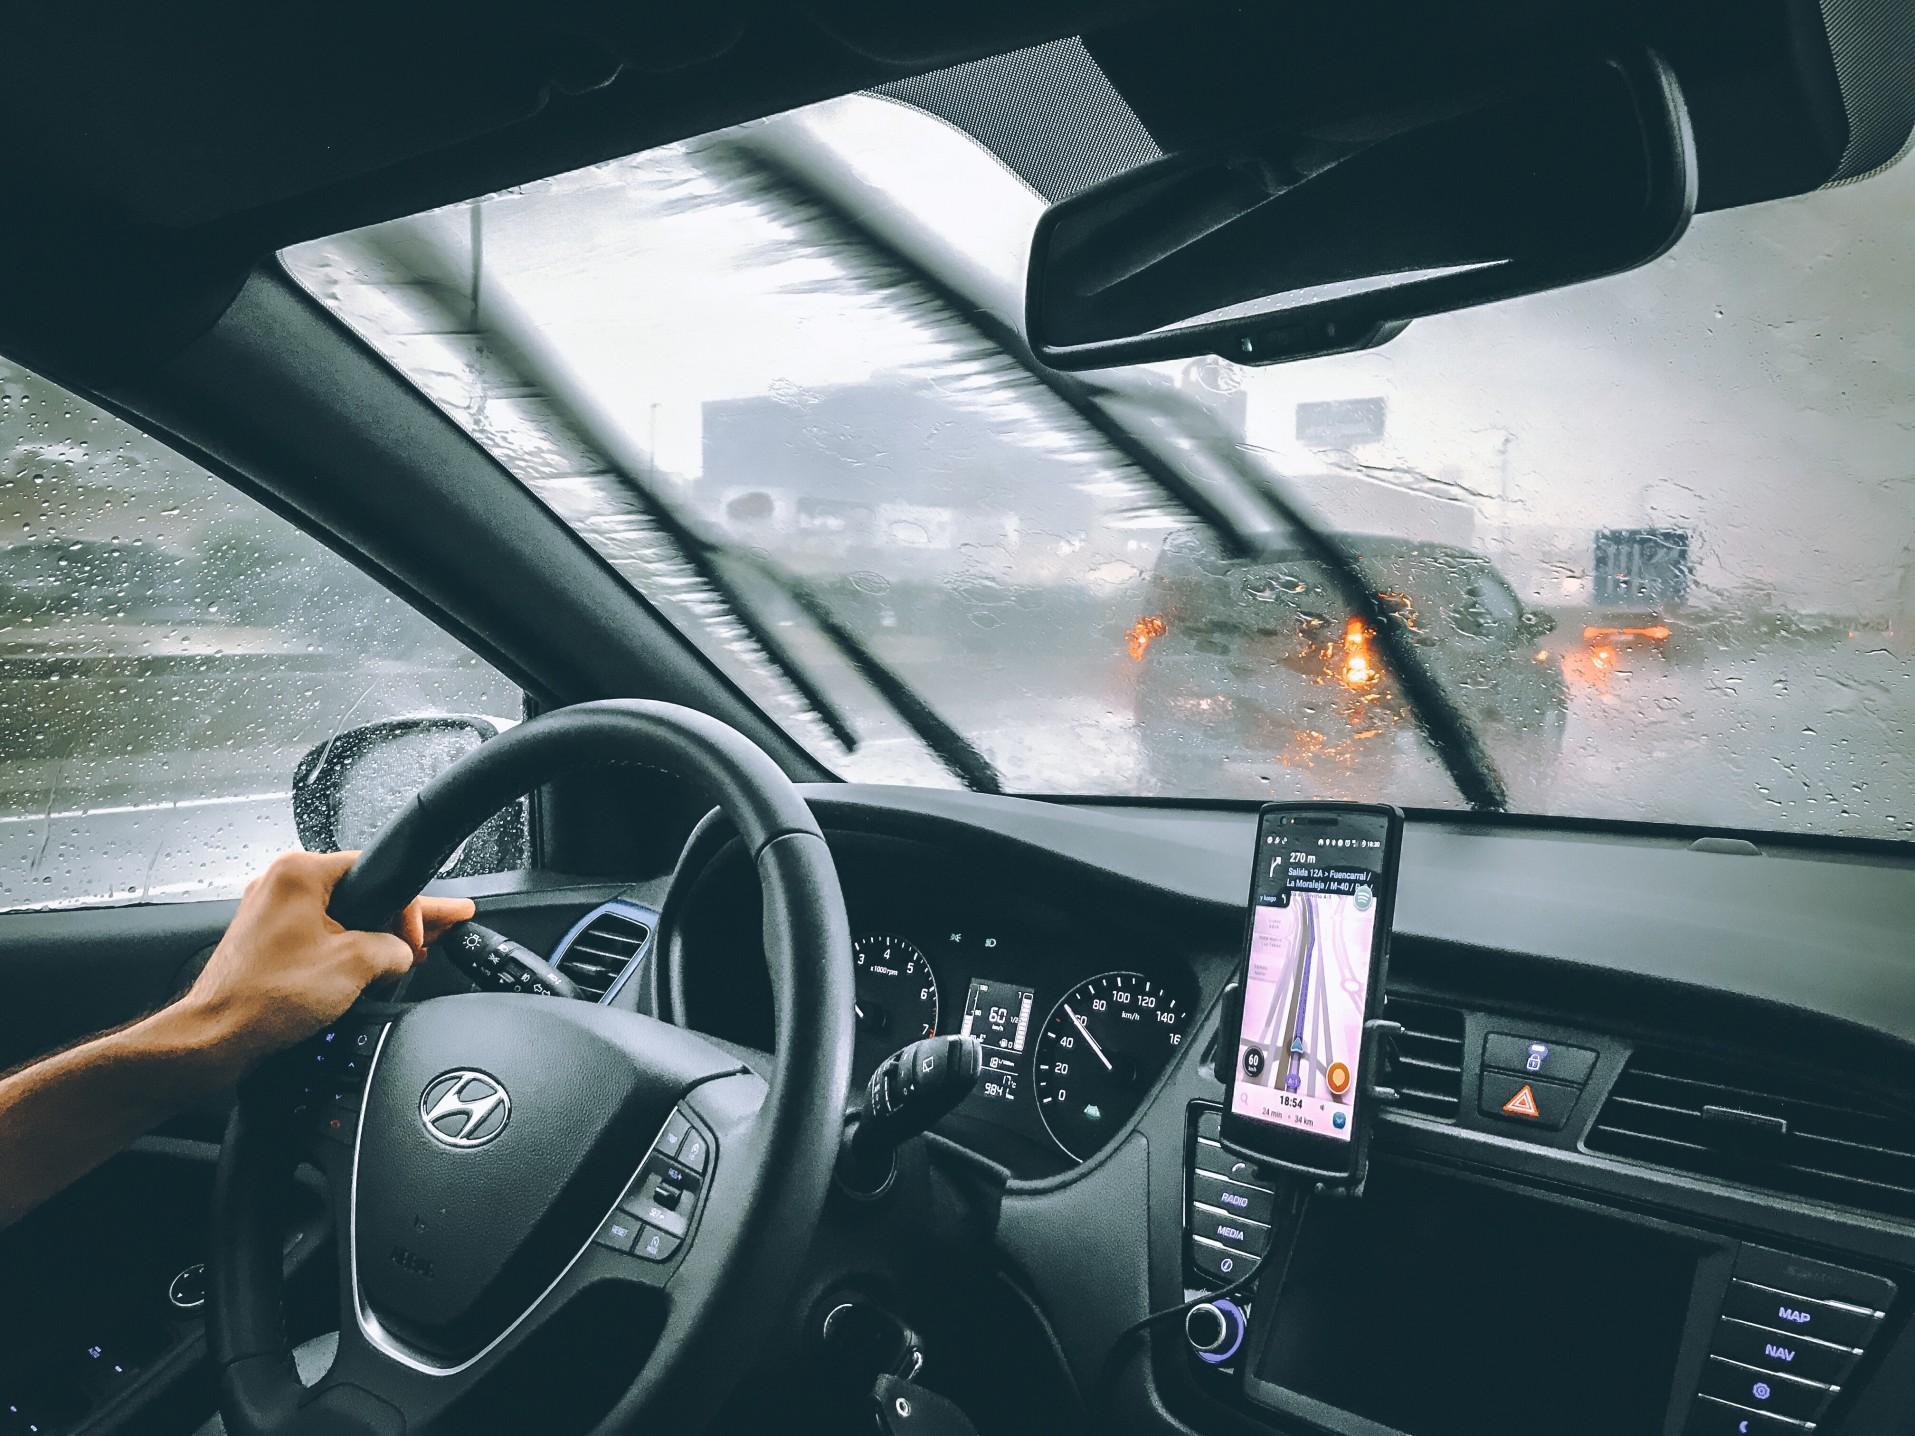 Weather-related crashes increased by 72% from 2005-2019.